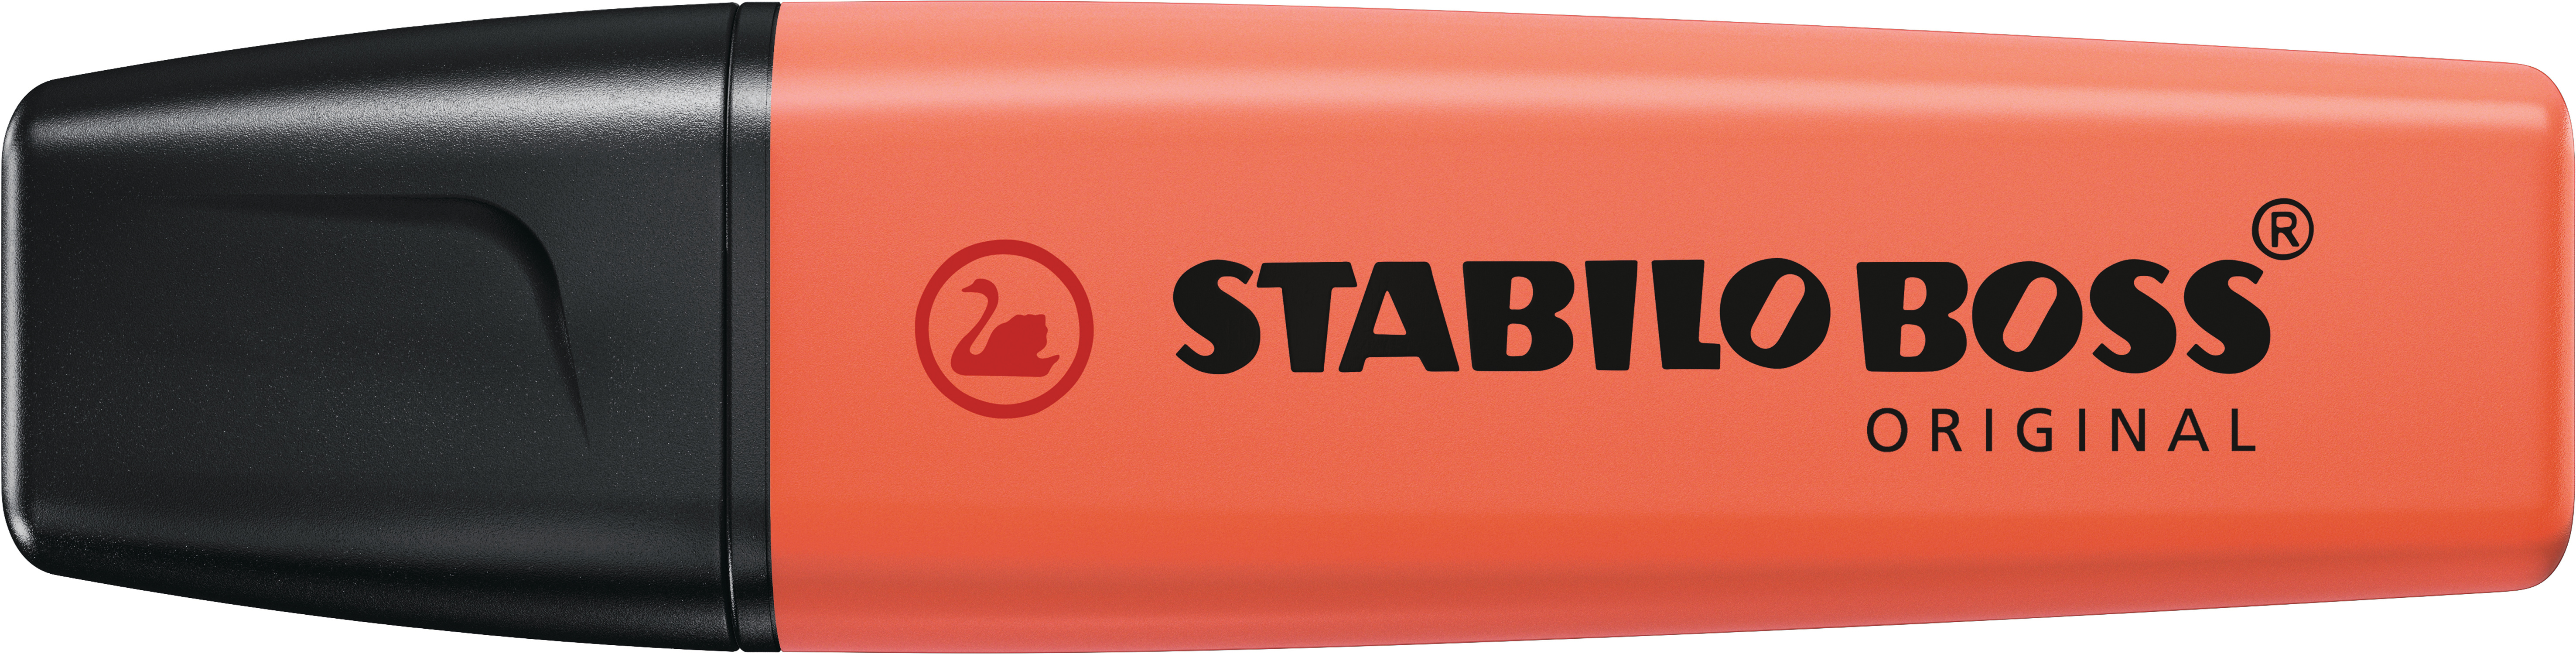 STABILO Textmarker BOSS Pastell 70/140 coral coral